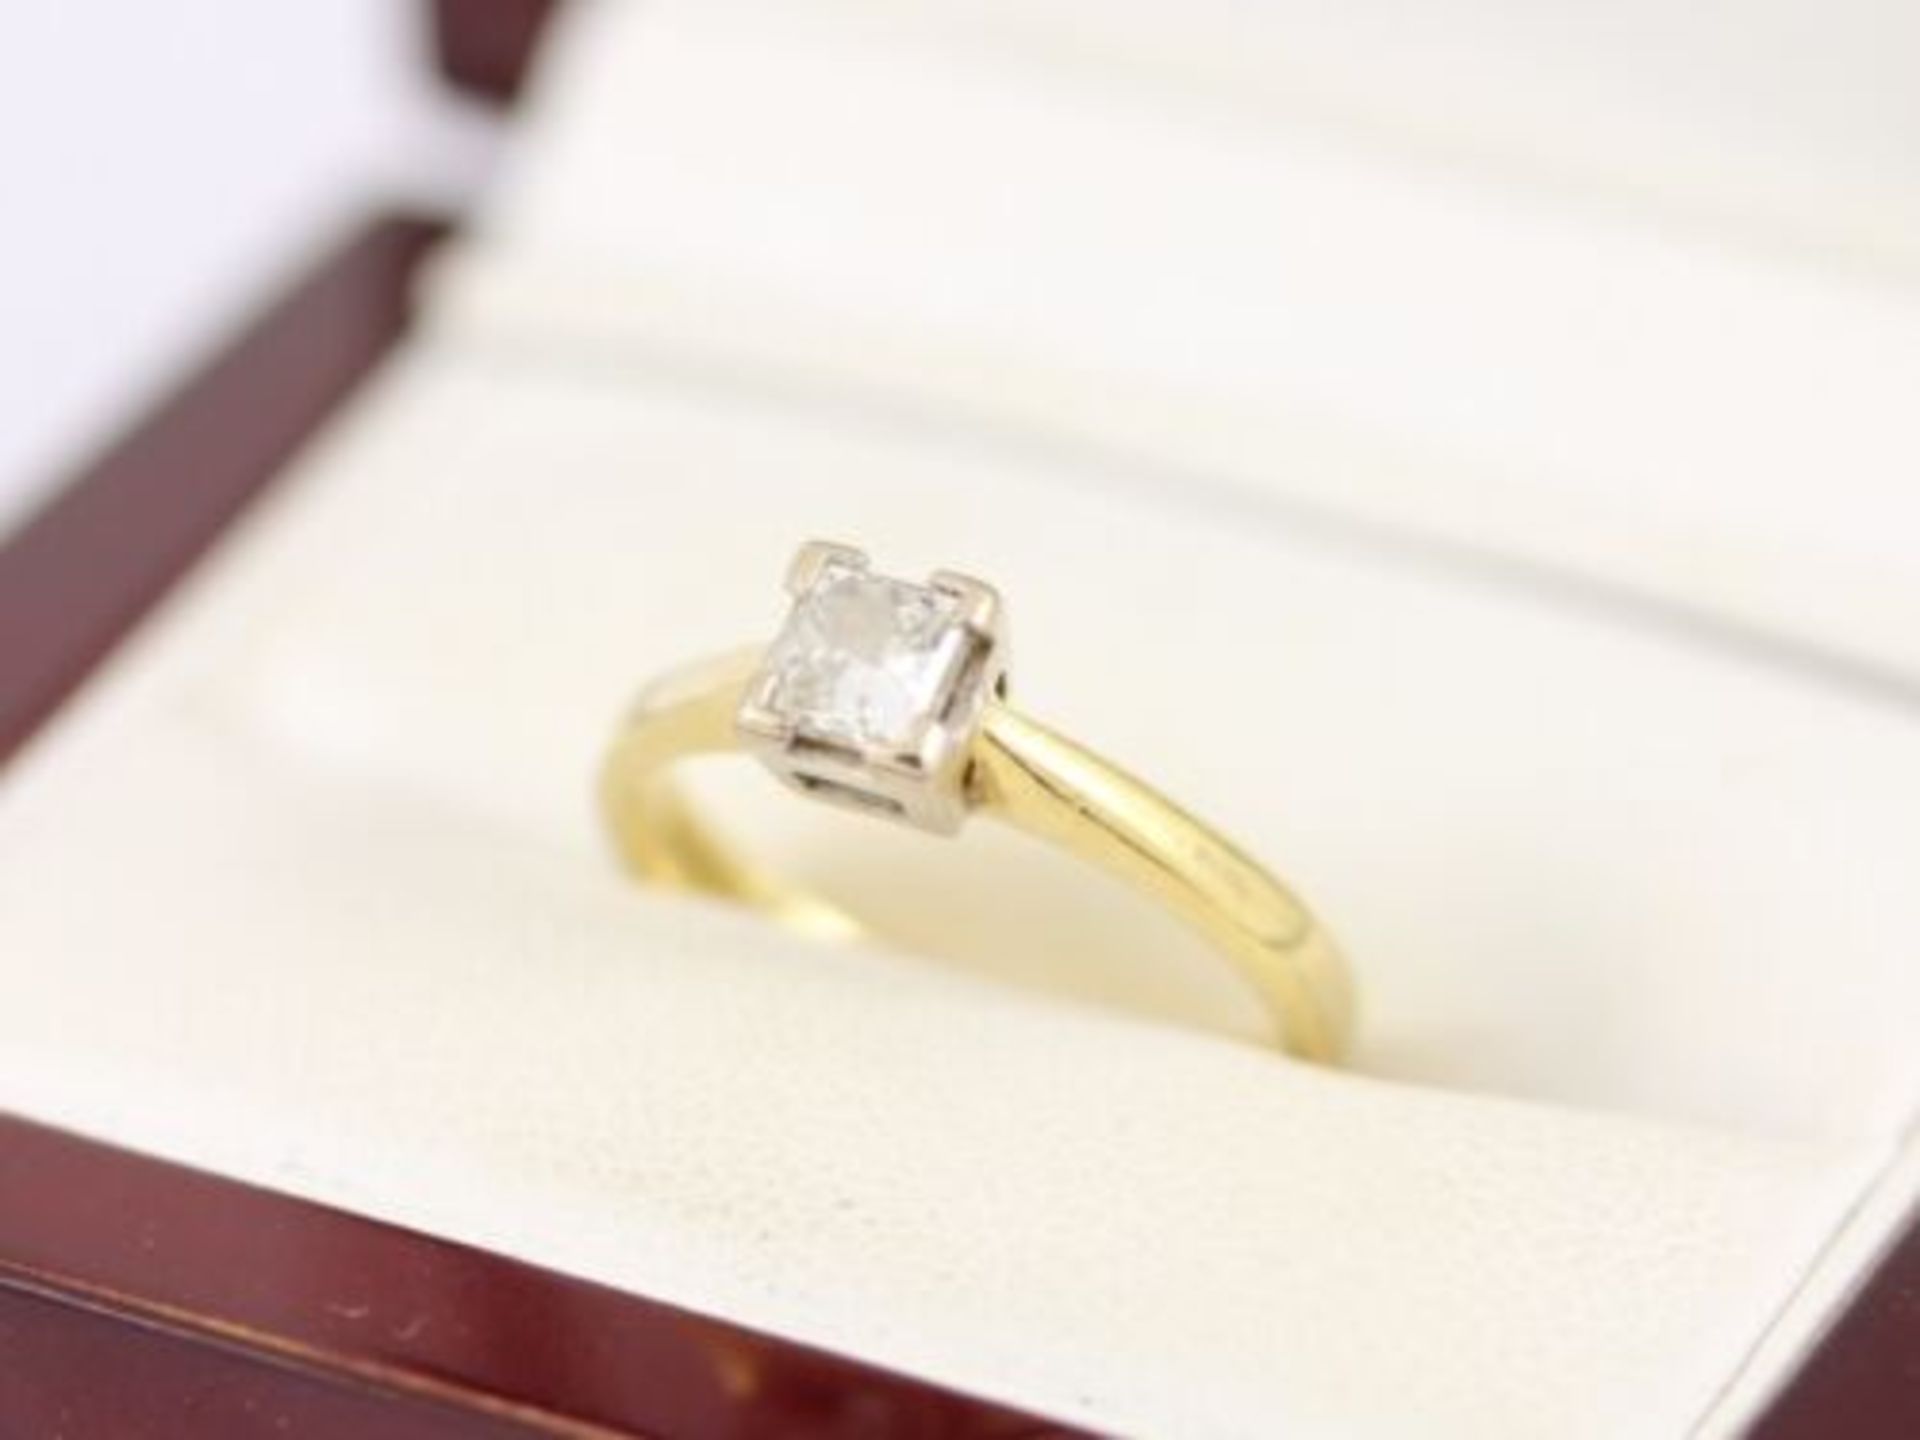 DIAMOND SOLITAIRE RING 18CT GOLD LADIES SIZE J 1/2 750 2.8G - Image 4 of 4